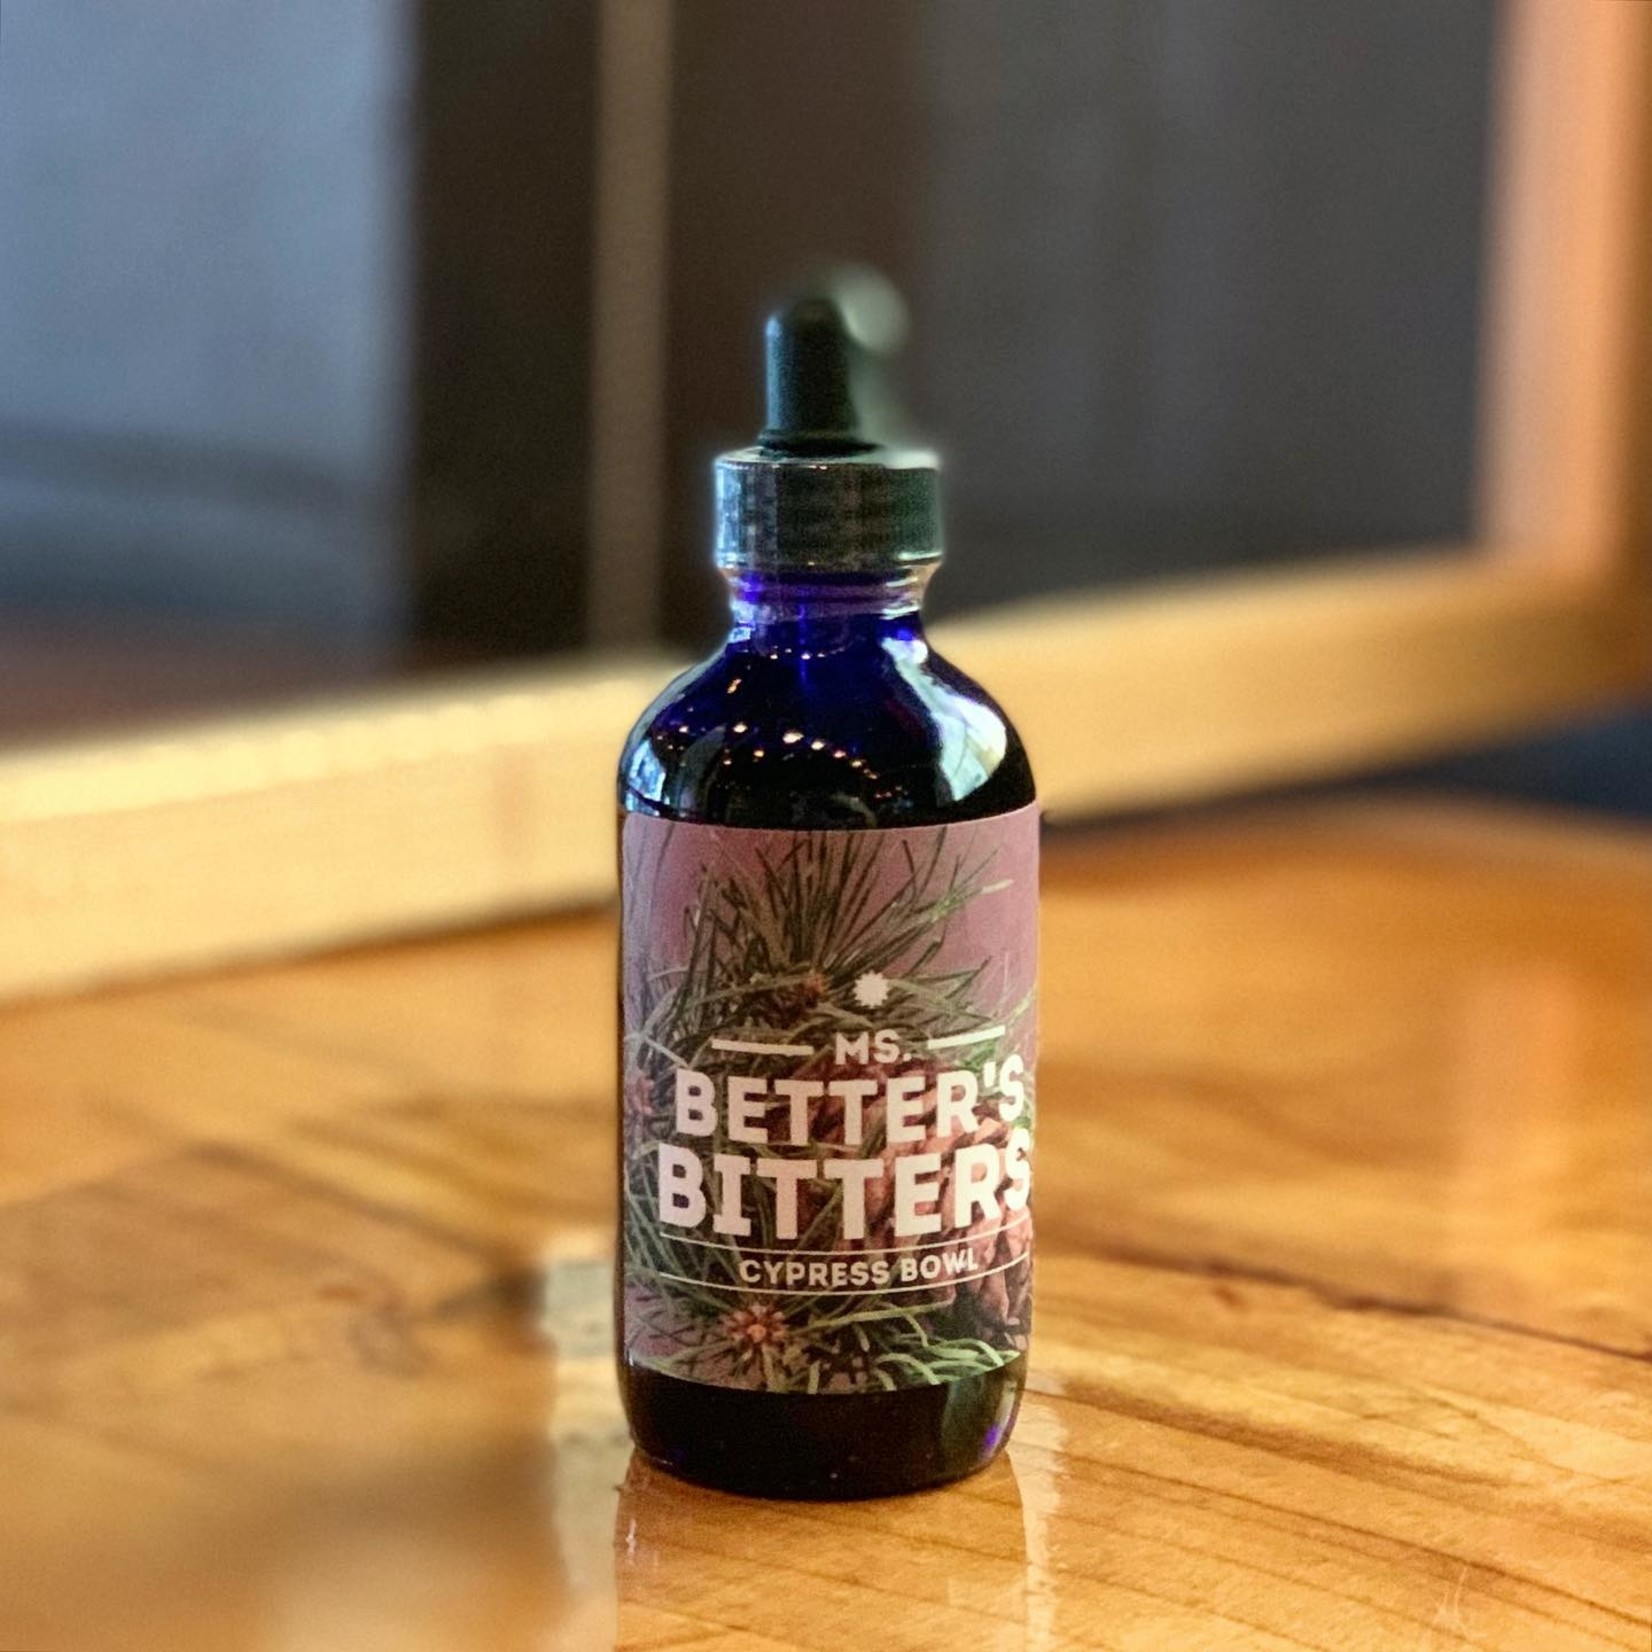 Ms Better's Bitters Ms Betters Bitters Cypress Bowl